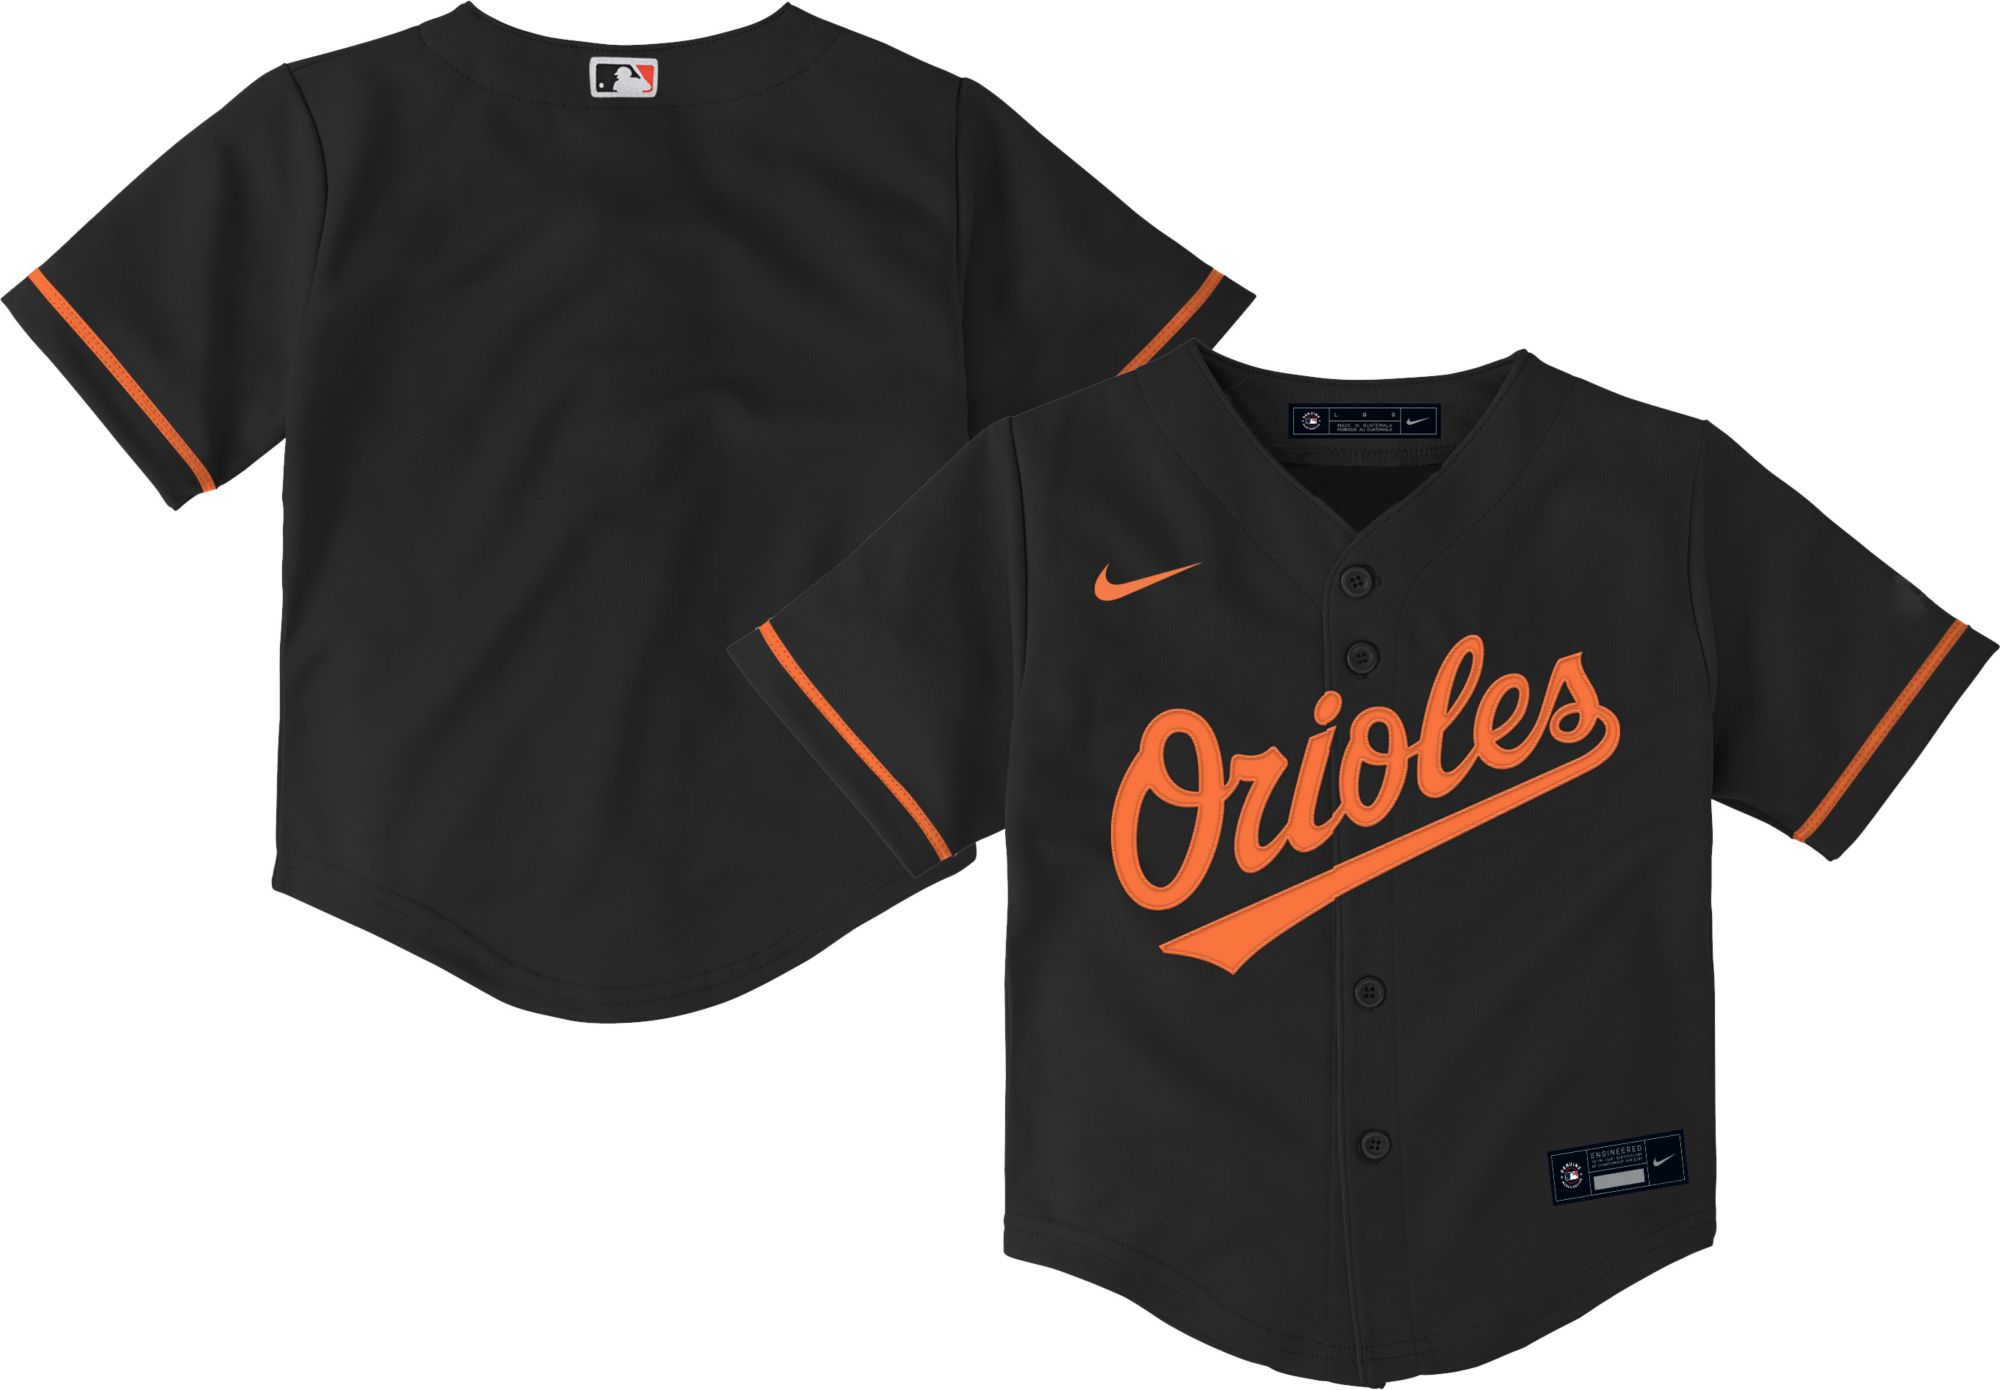 Top-selling Orioles jersey